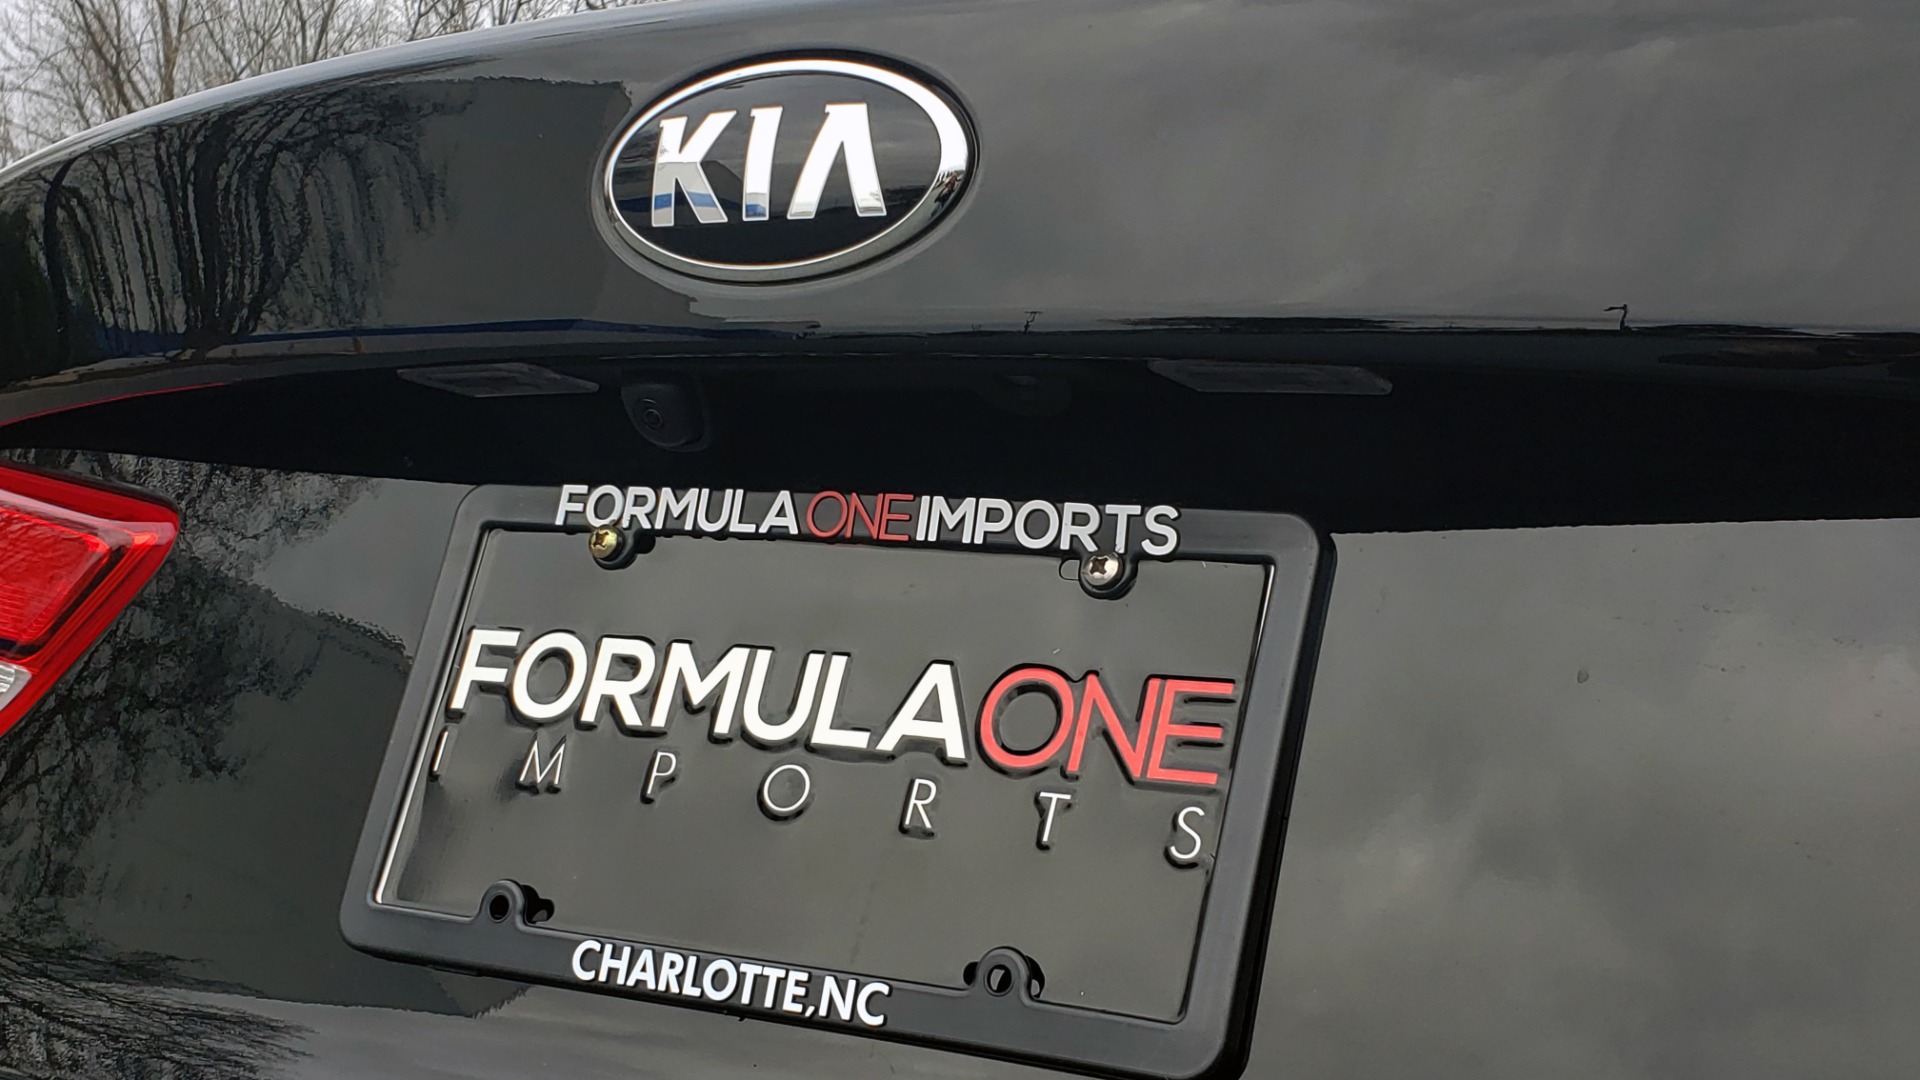 Used 2019 Kia OPTIMA LX AUTO / 2.4L 4-CYL / 6-SPD AUTO / REARVIEW / LOW MILES for sale Sold at Formula Imports in Charlotte NC 28227 27